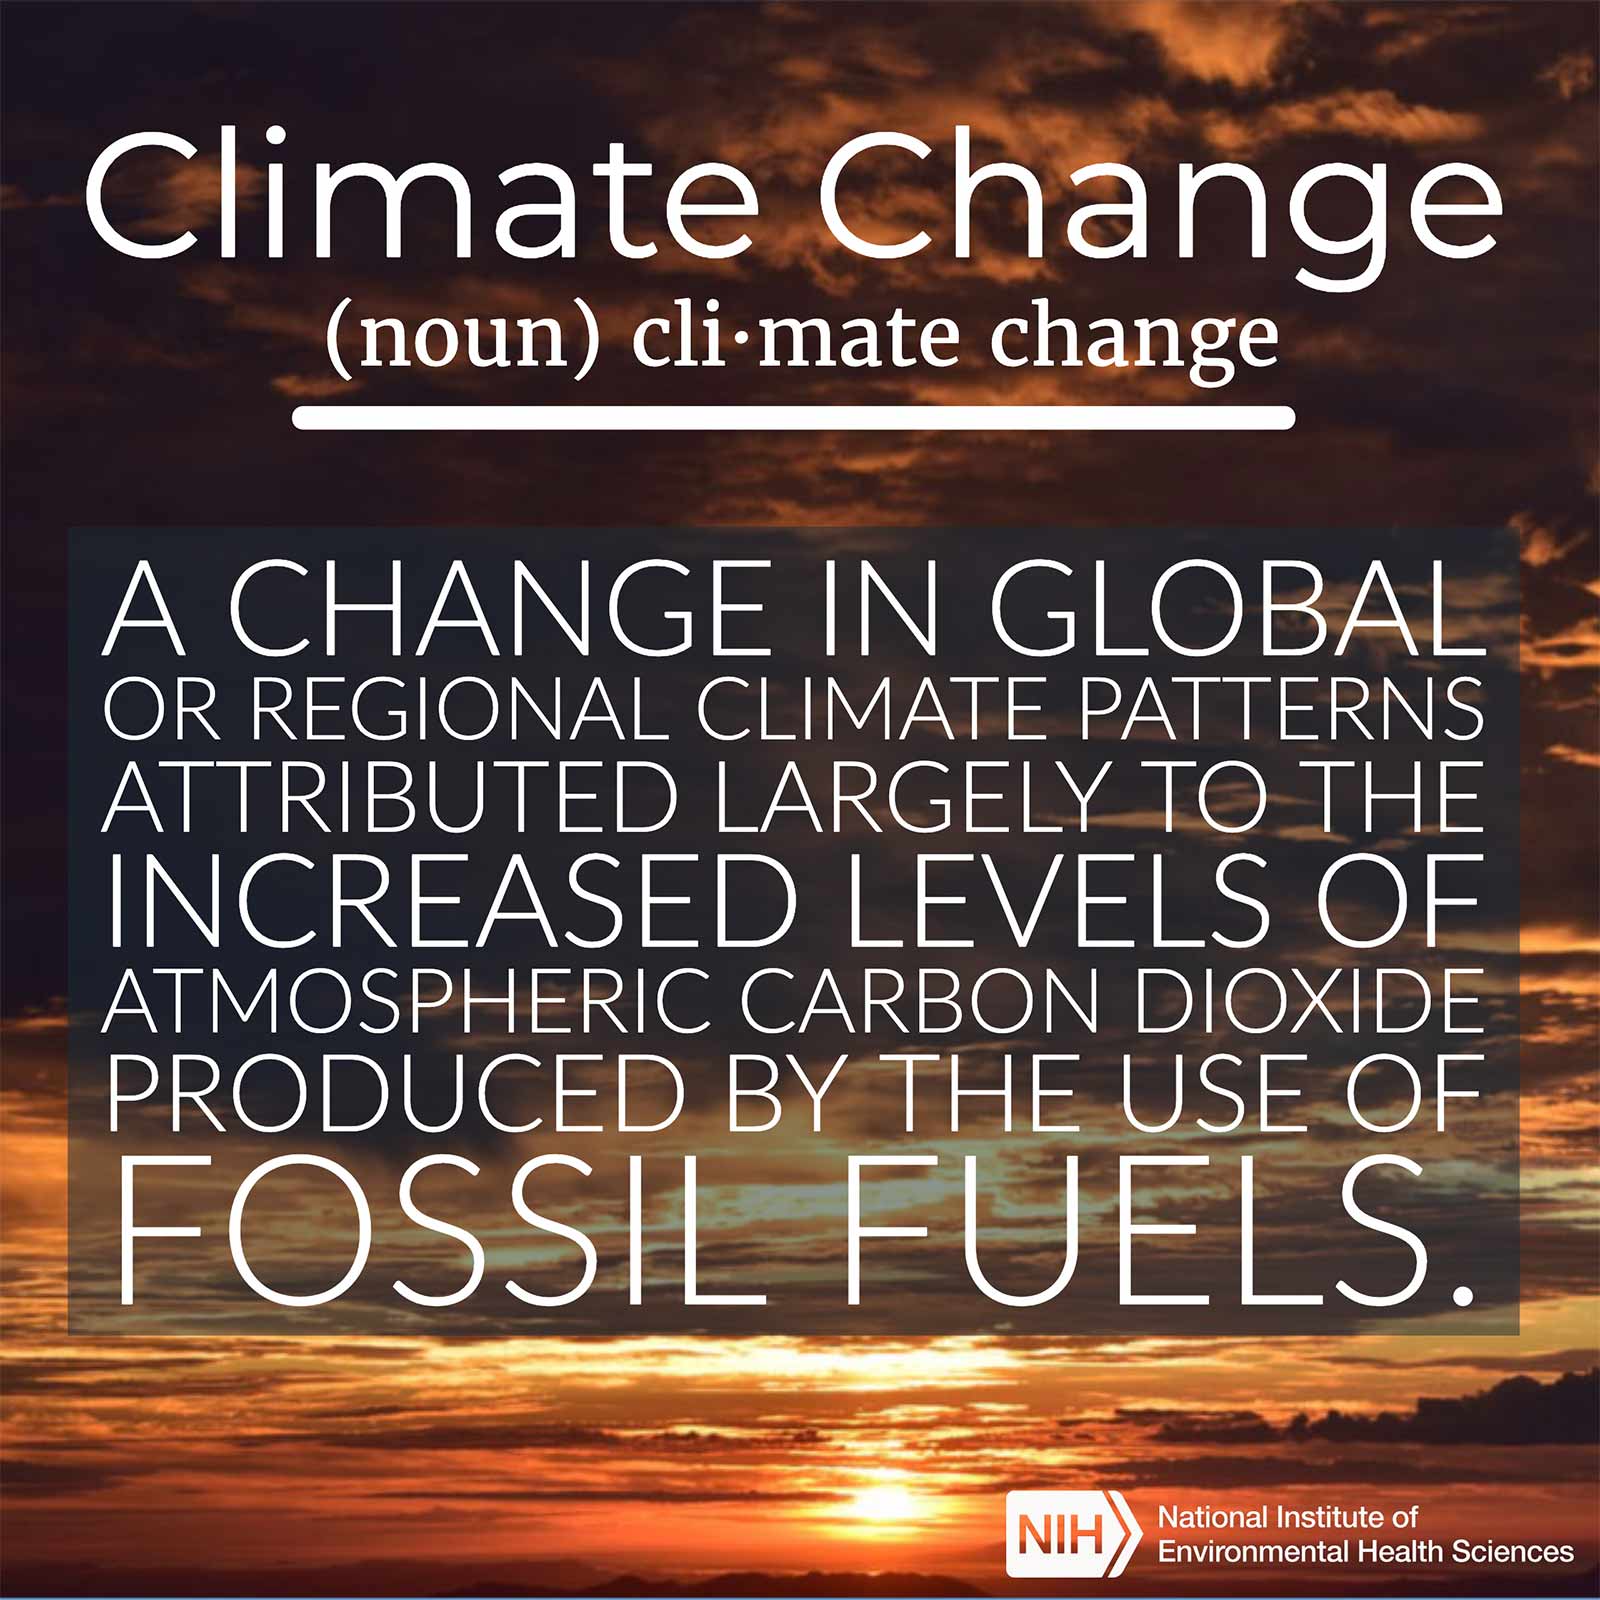 Climate change (noun) defined as &#39;A change in global or regional climate patterns attributed largely to the increased levels of atmospheric carbon dioxide produced by the use of fossil fuels.&#39;